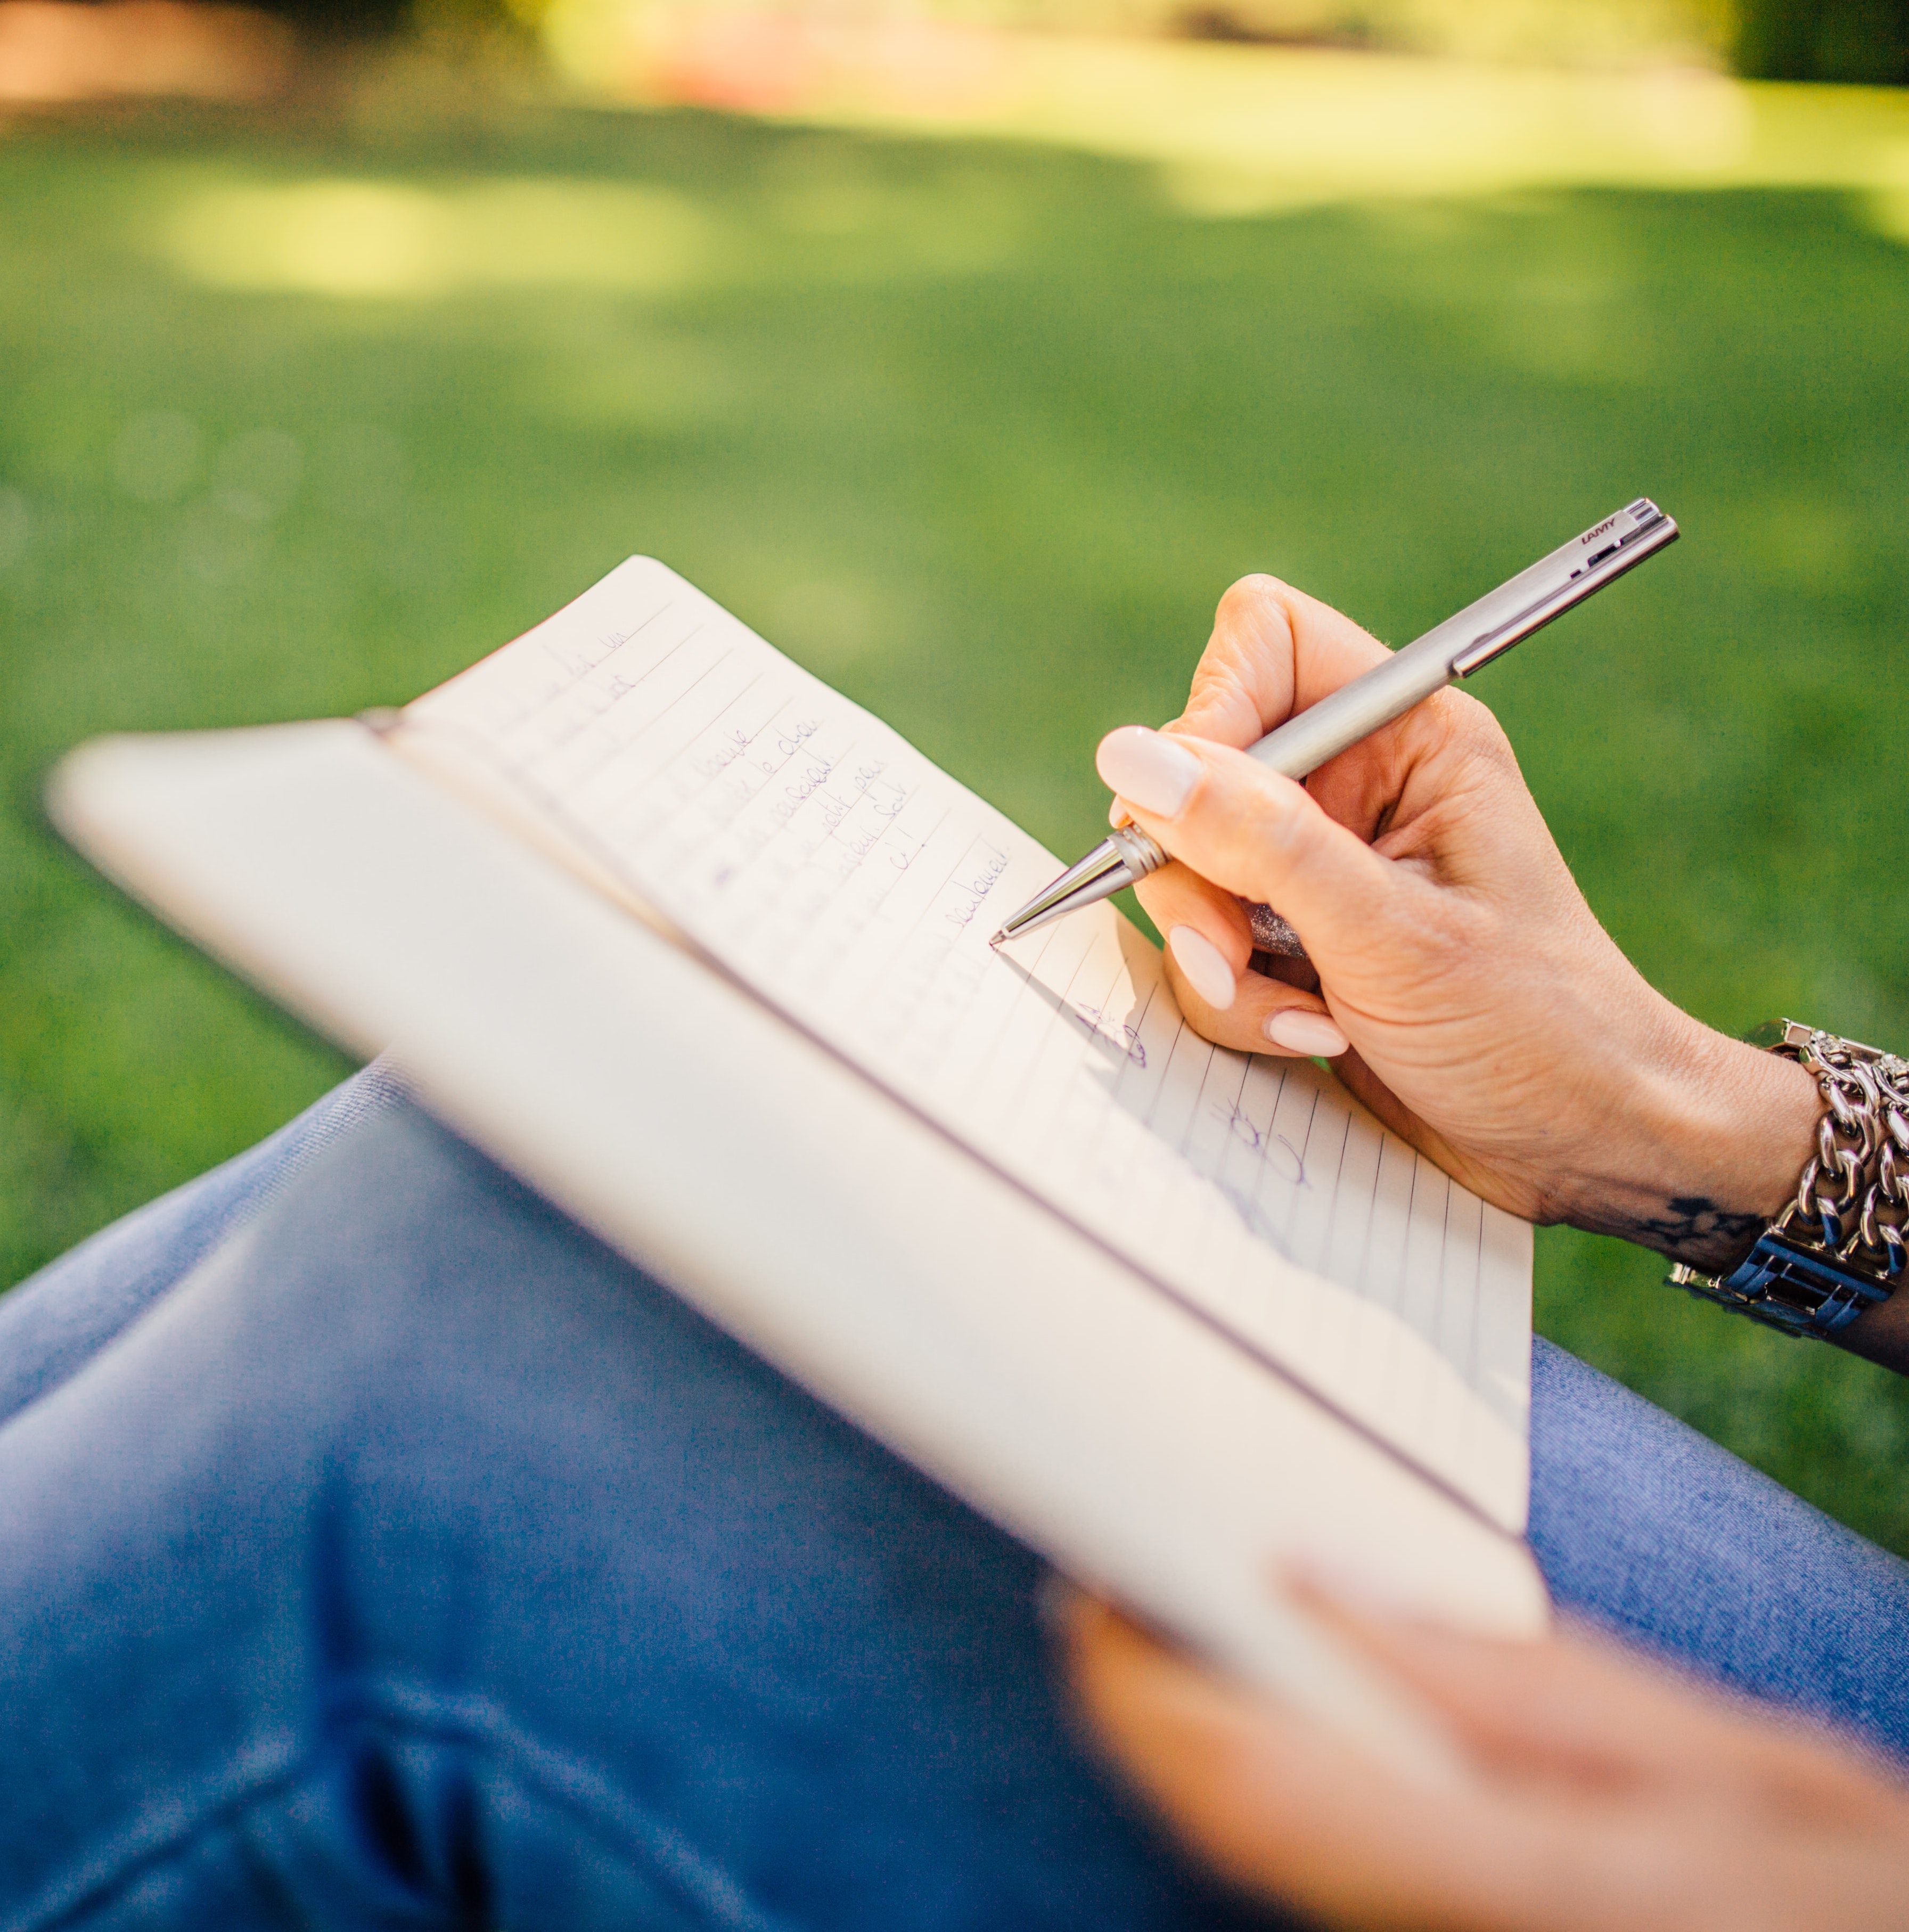 Stock image of a person
                                writing in a journal in a grassy field